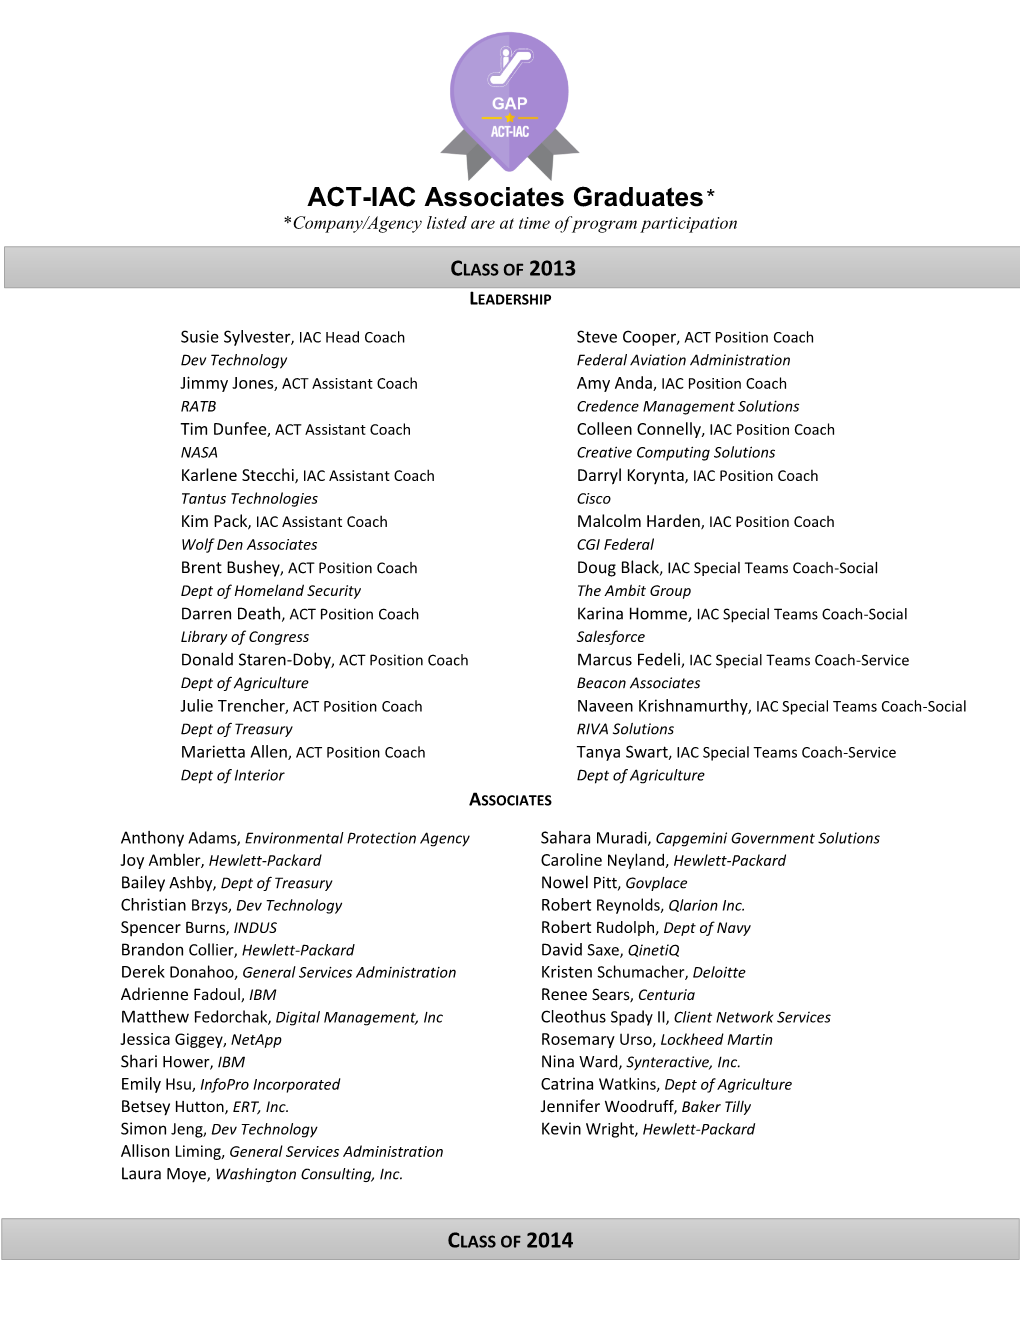 ACT-IAC Associates Graduates* *Company/Agency Listed Are at Time of Program Participation